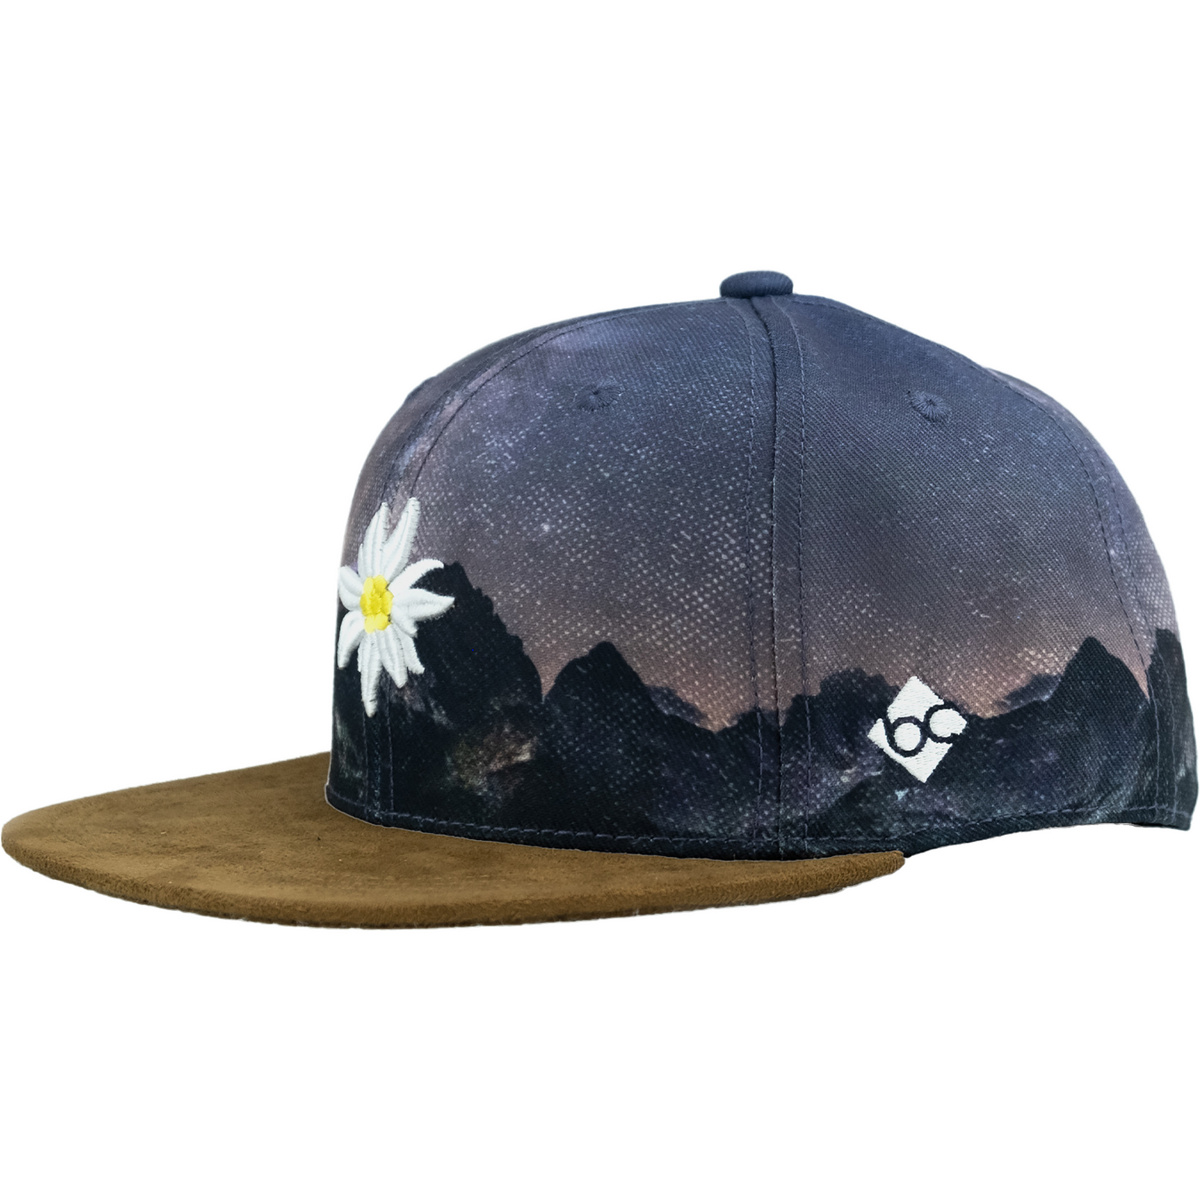 Image of Bavarian Caps Cappellino Edelweiß Sternennacht